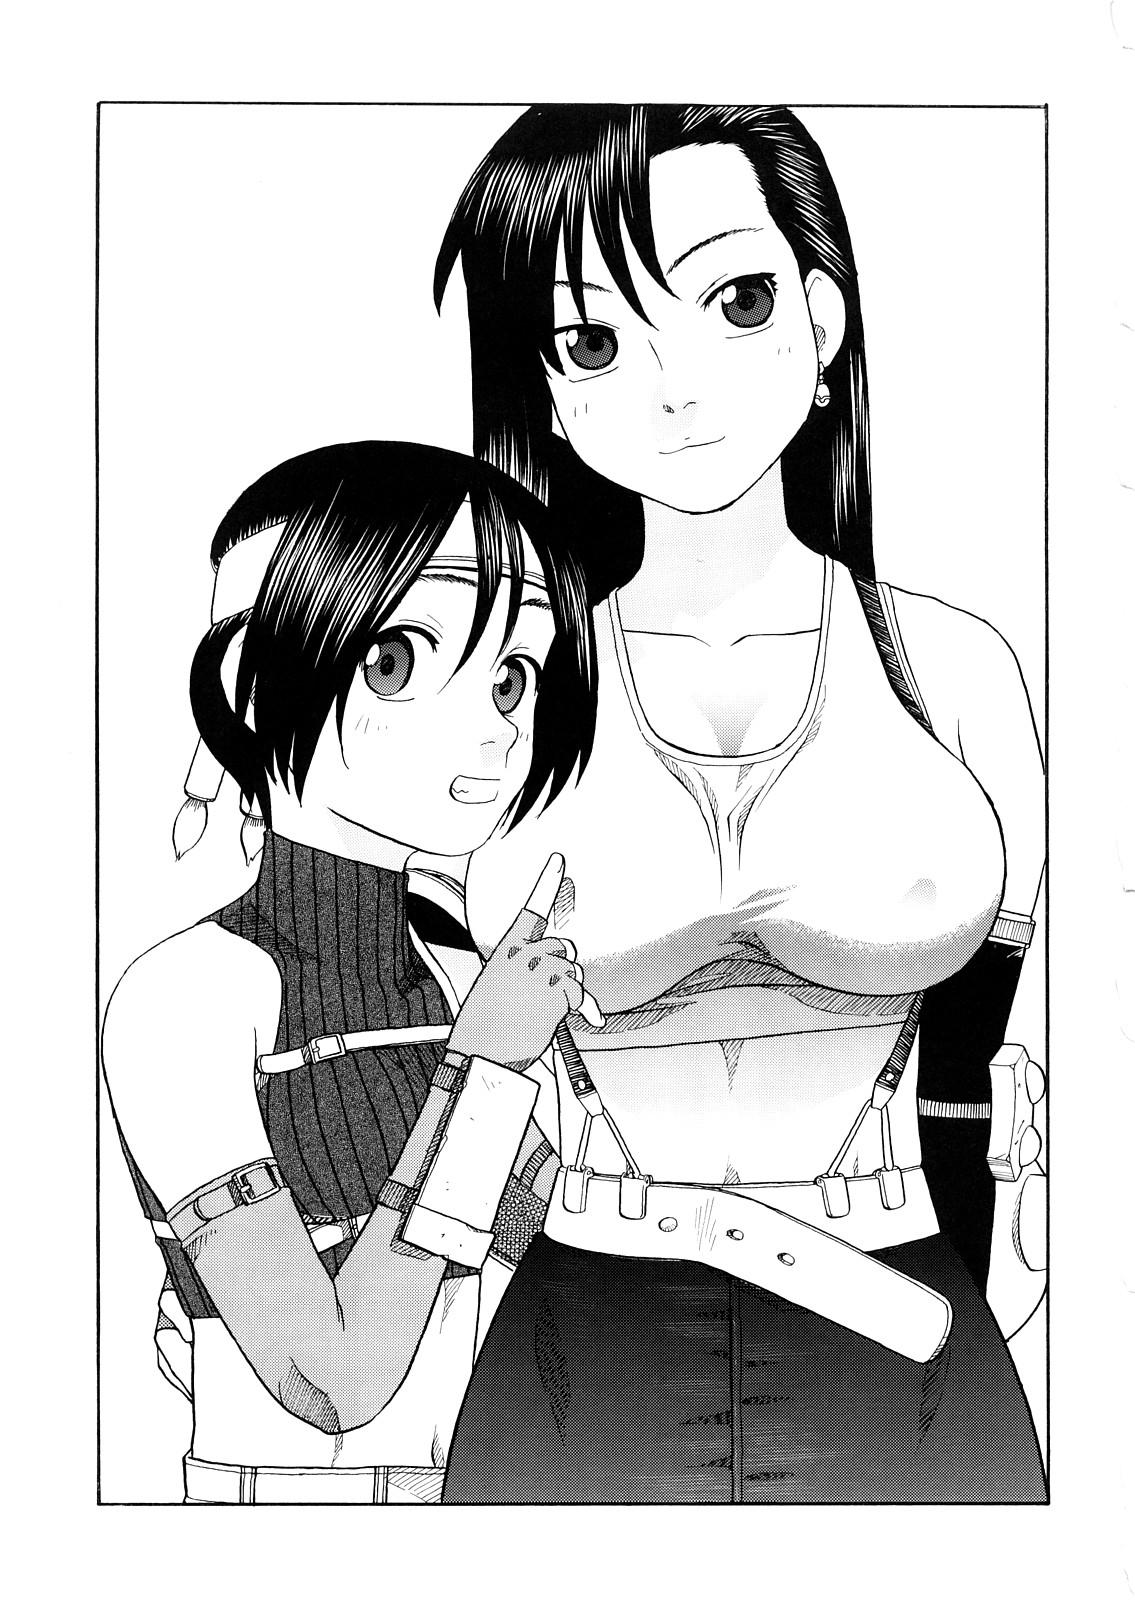 Humiliation Pov Tifa to Yuffie to Yojouhan - Final fantasy vii Shemale Sex - Page 2